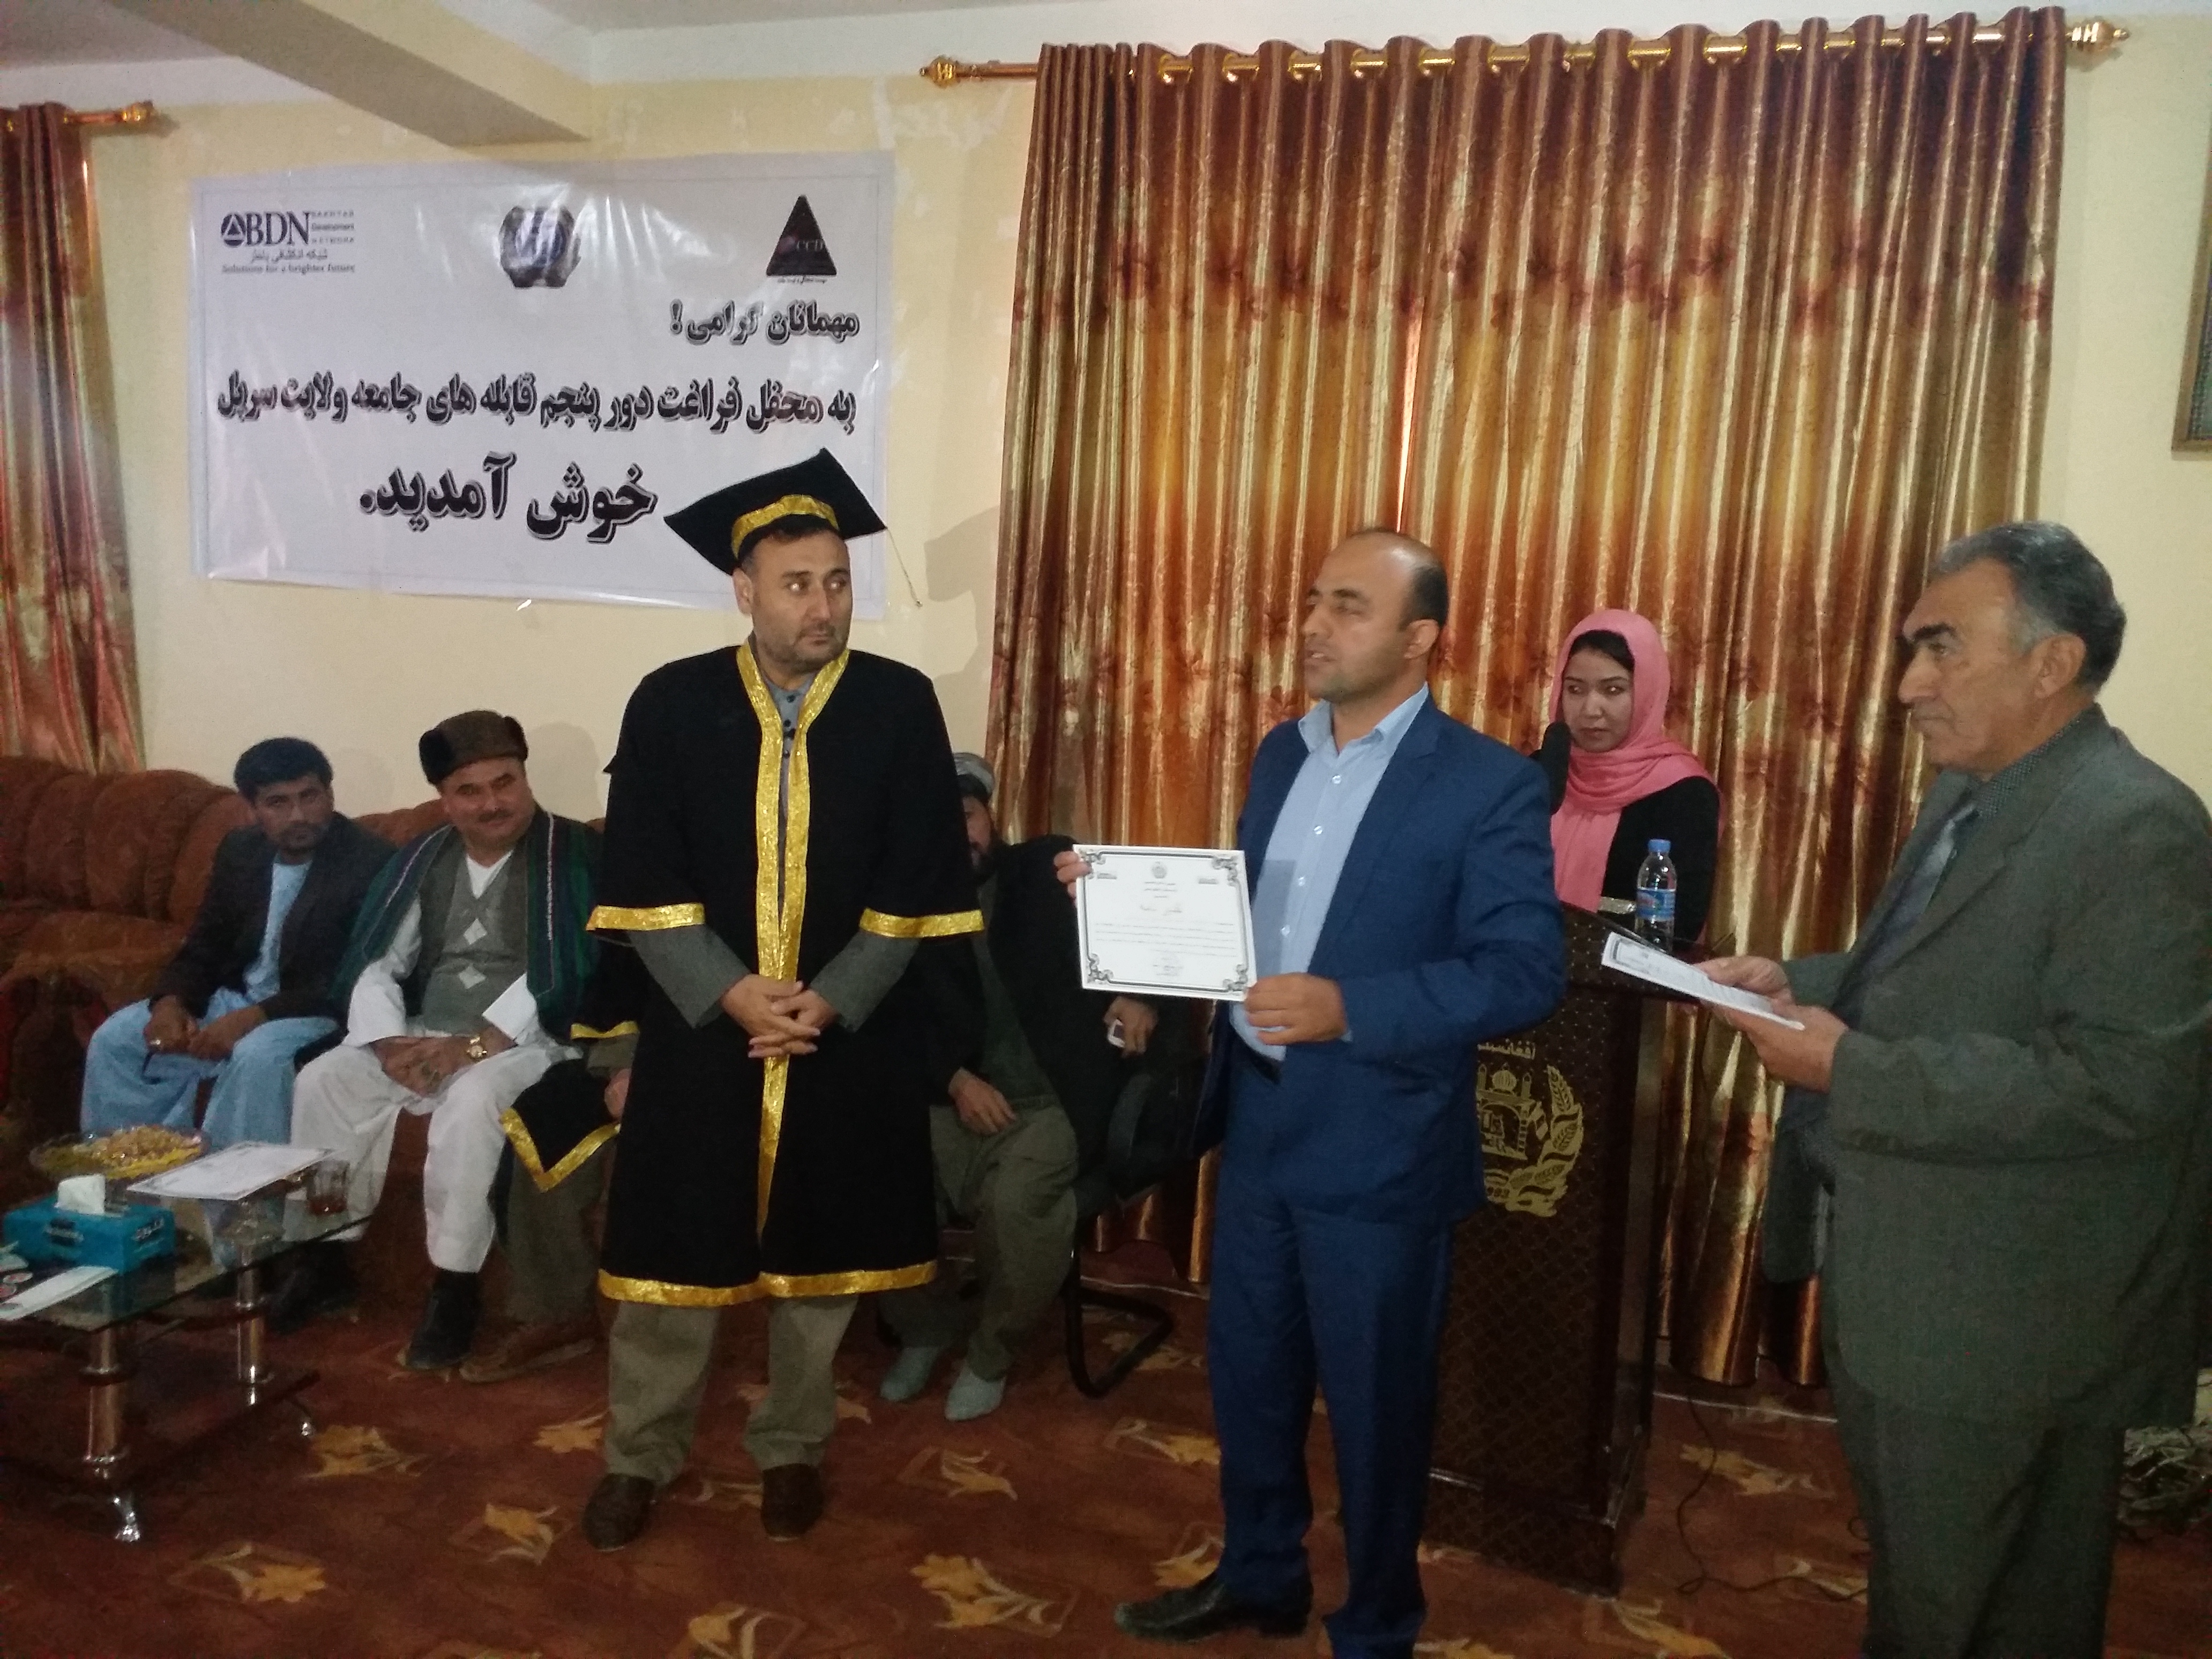 BDN Received appreciation letter from Provincial governor